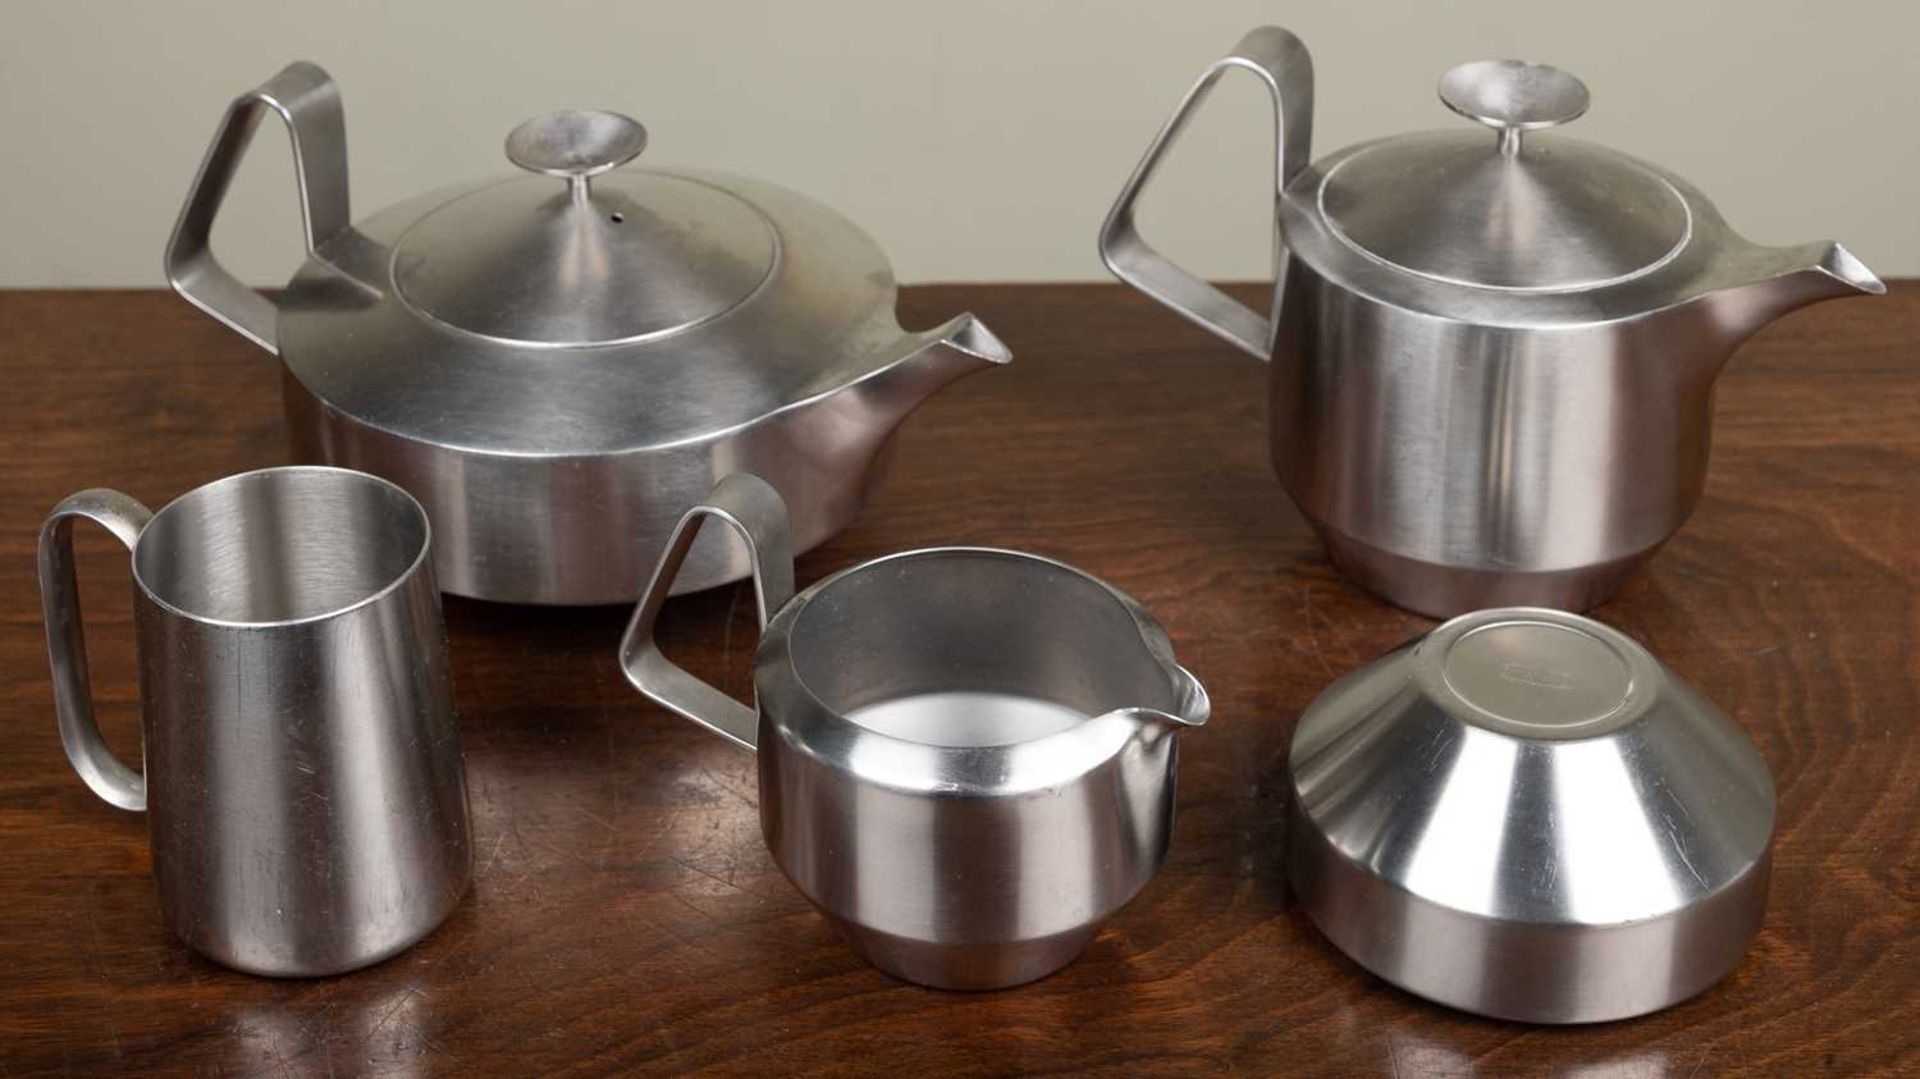 Robert Welch, an Old Hall Alveston stainless steel tea set consisting of a tea pot, hot water jug, - Image 2 of 2